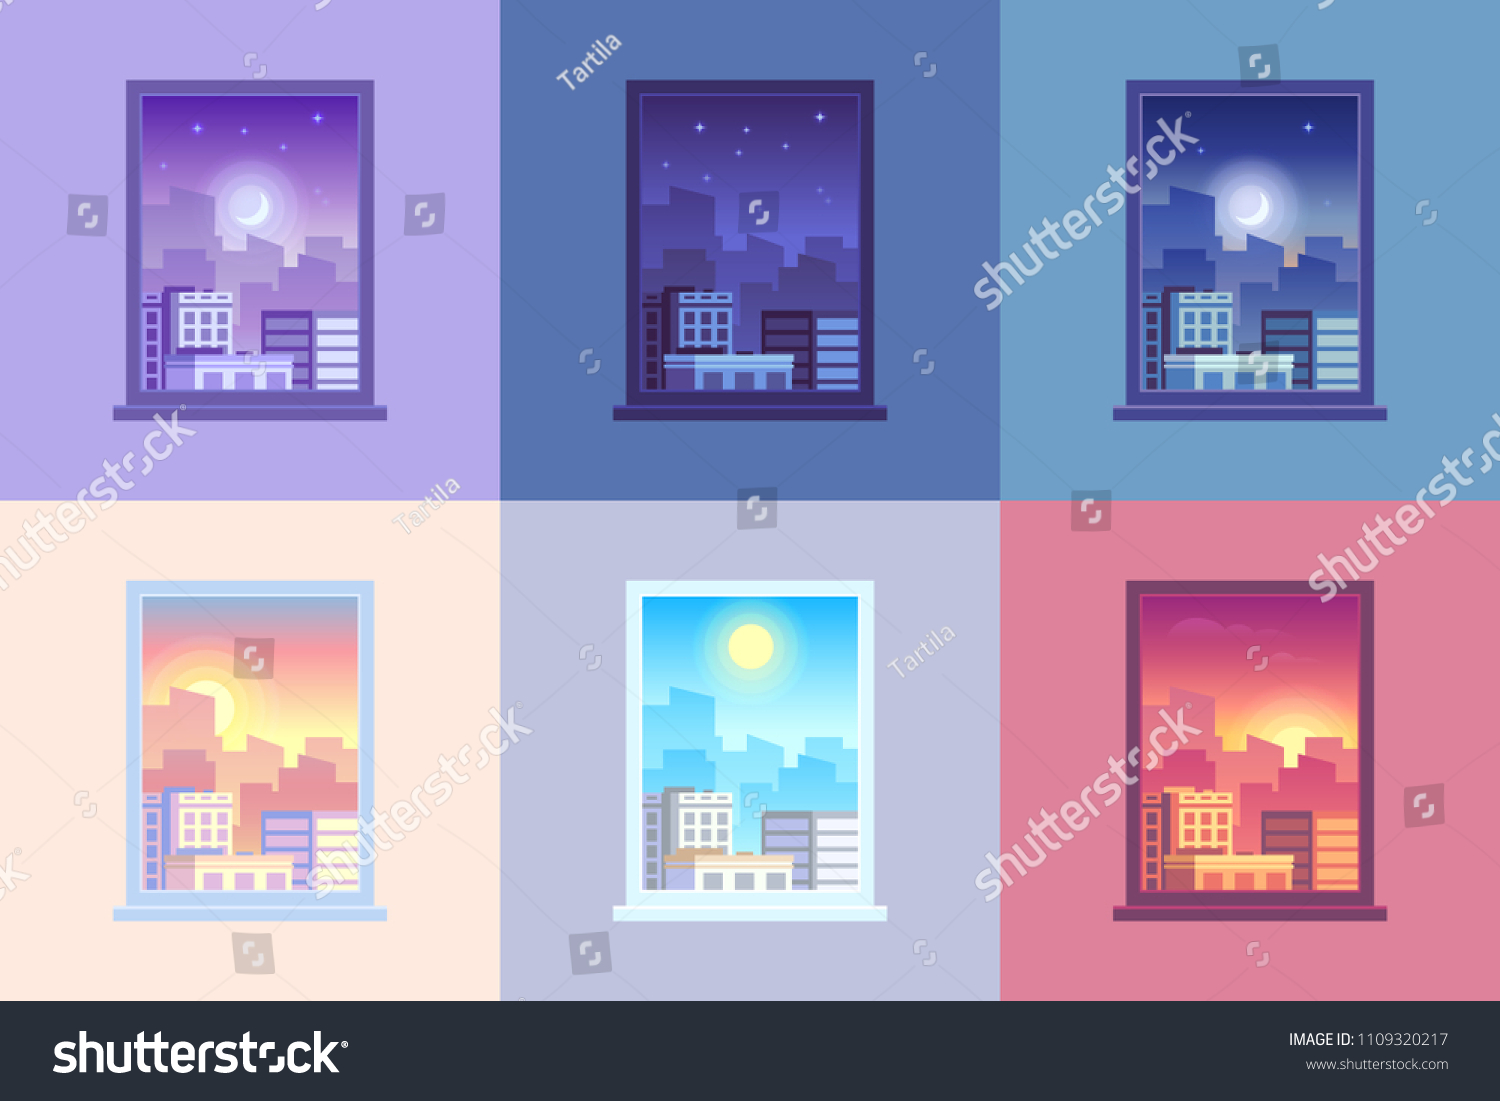 Window day time view. Sunrise sun dawn morning noon sunset dusk afternoon day and night stars at city house windows apartment colorful purple orange blue pink cartoon vector concept illustration #1109320217